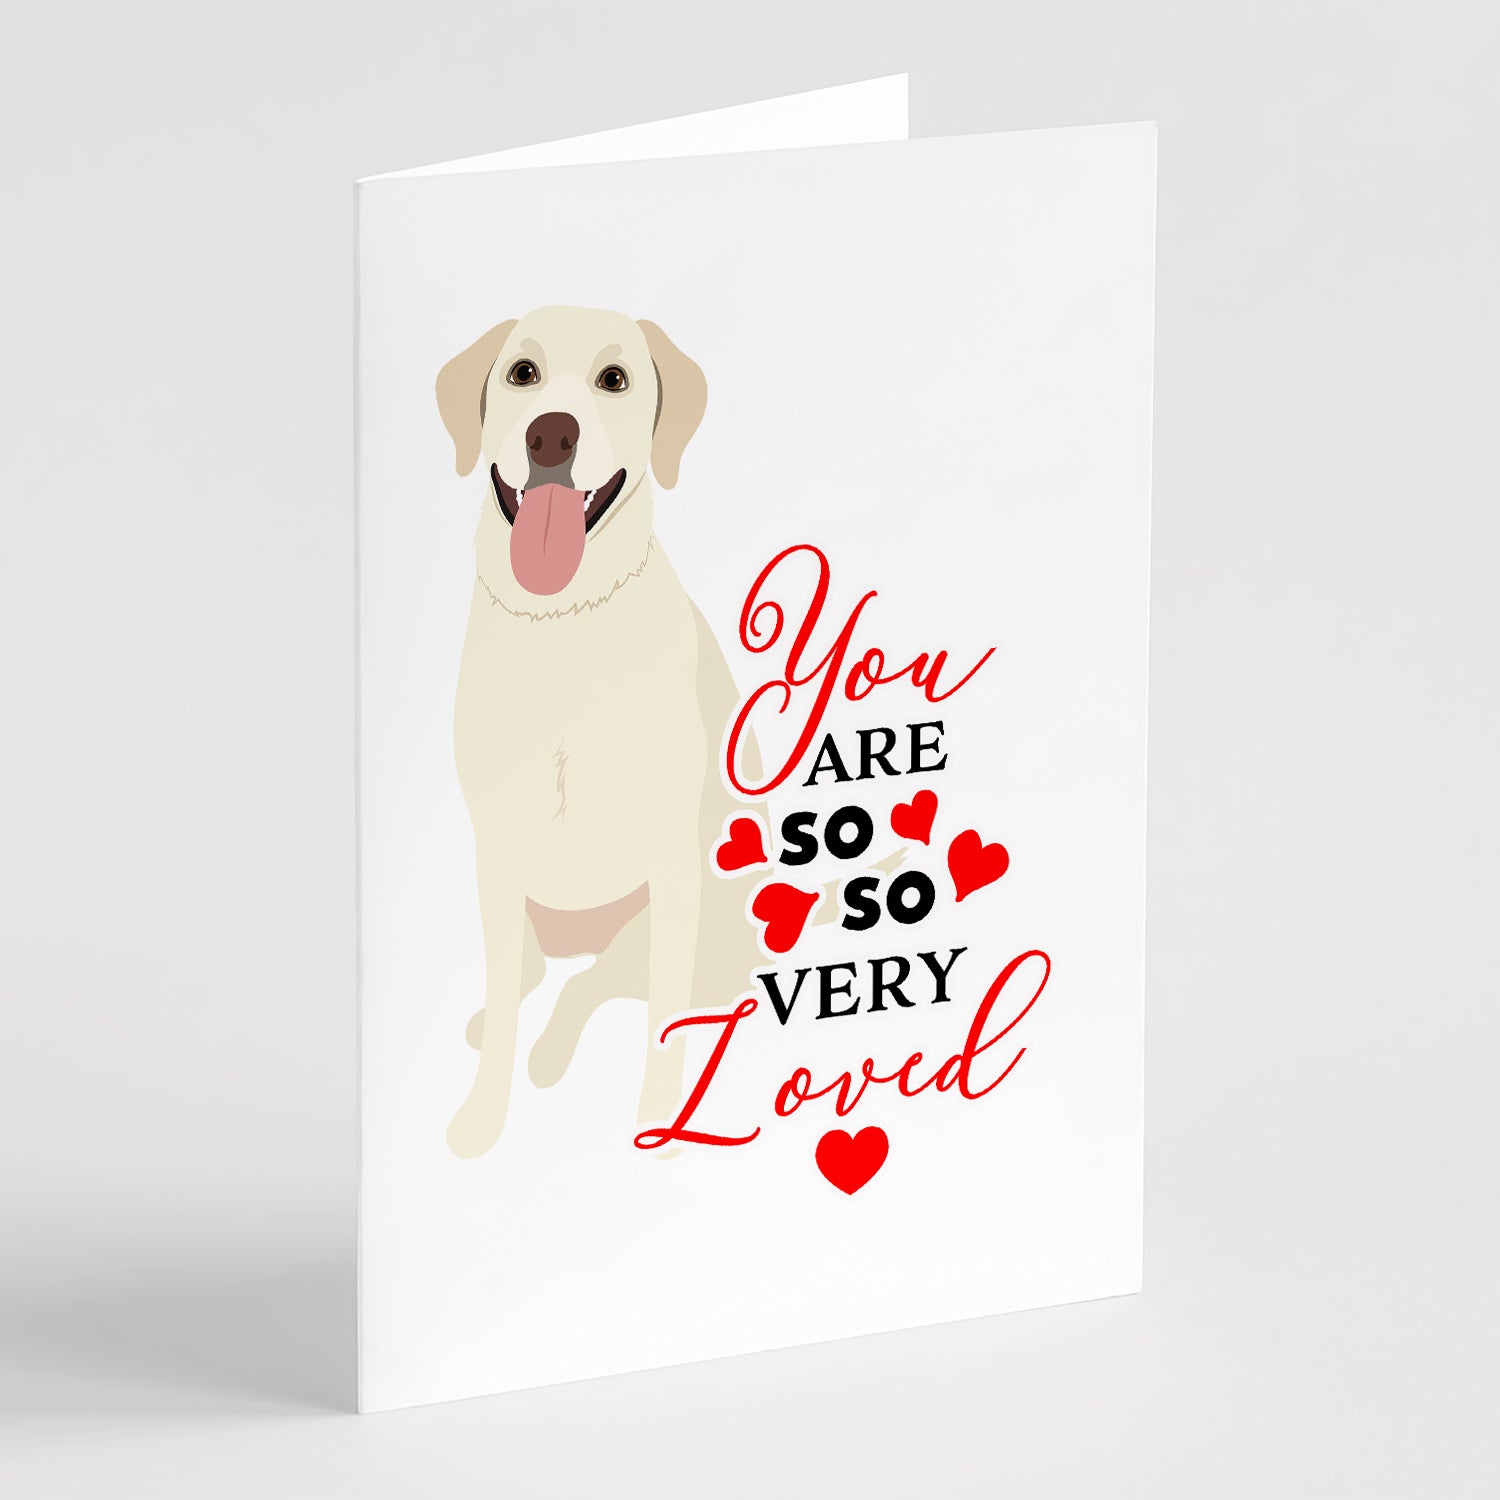 Buy this Labrador Retriever Yellow #1 so Loved Greeting Cards and Envelopes Pack of 8